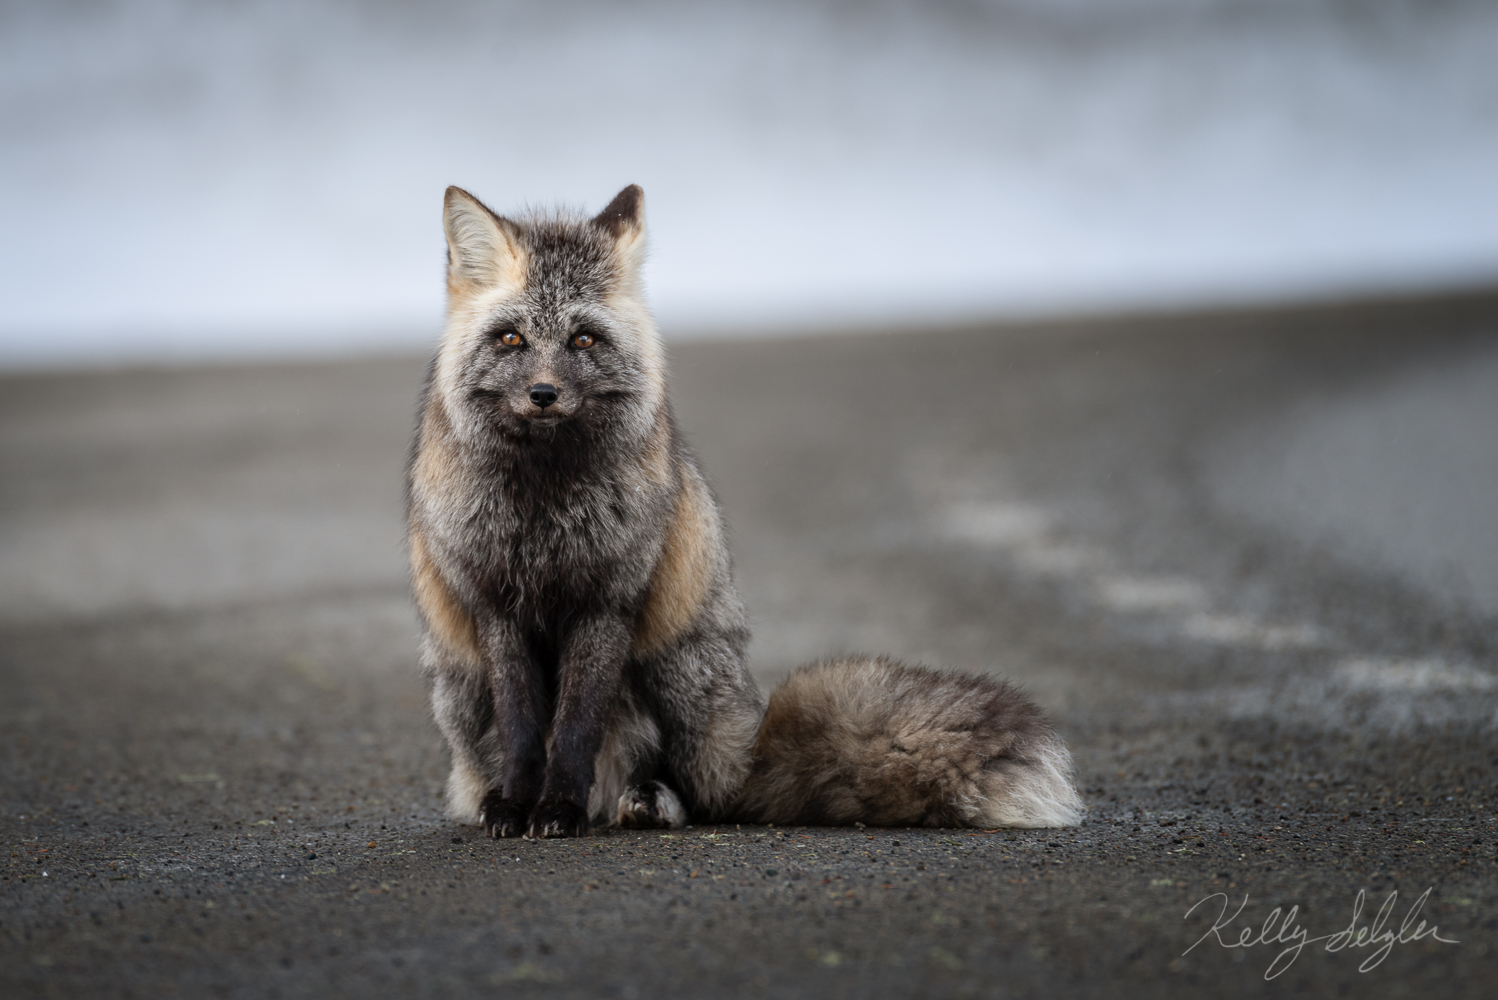 As I was sitting on the ground to photograph this fox, it sat quietly and posed for me.